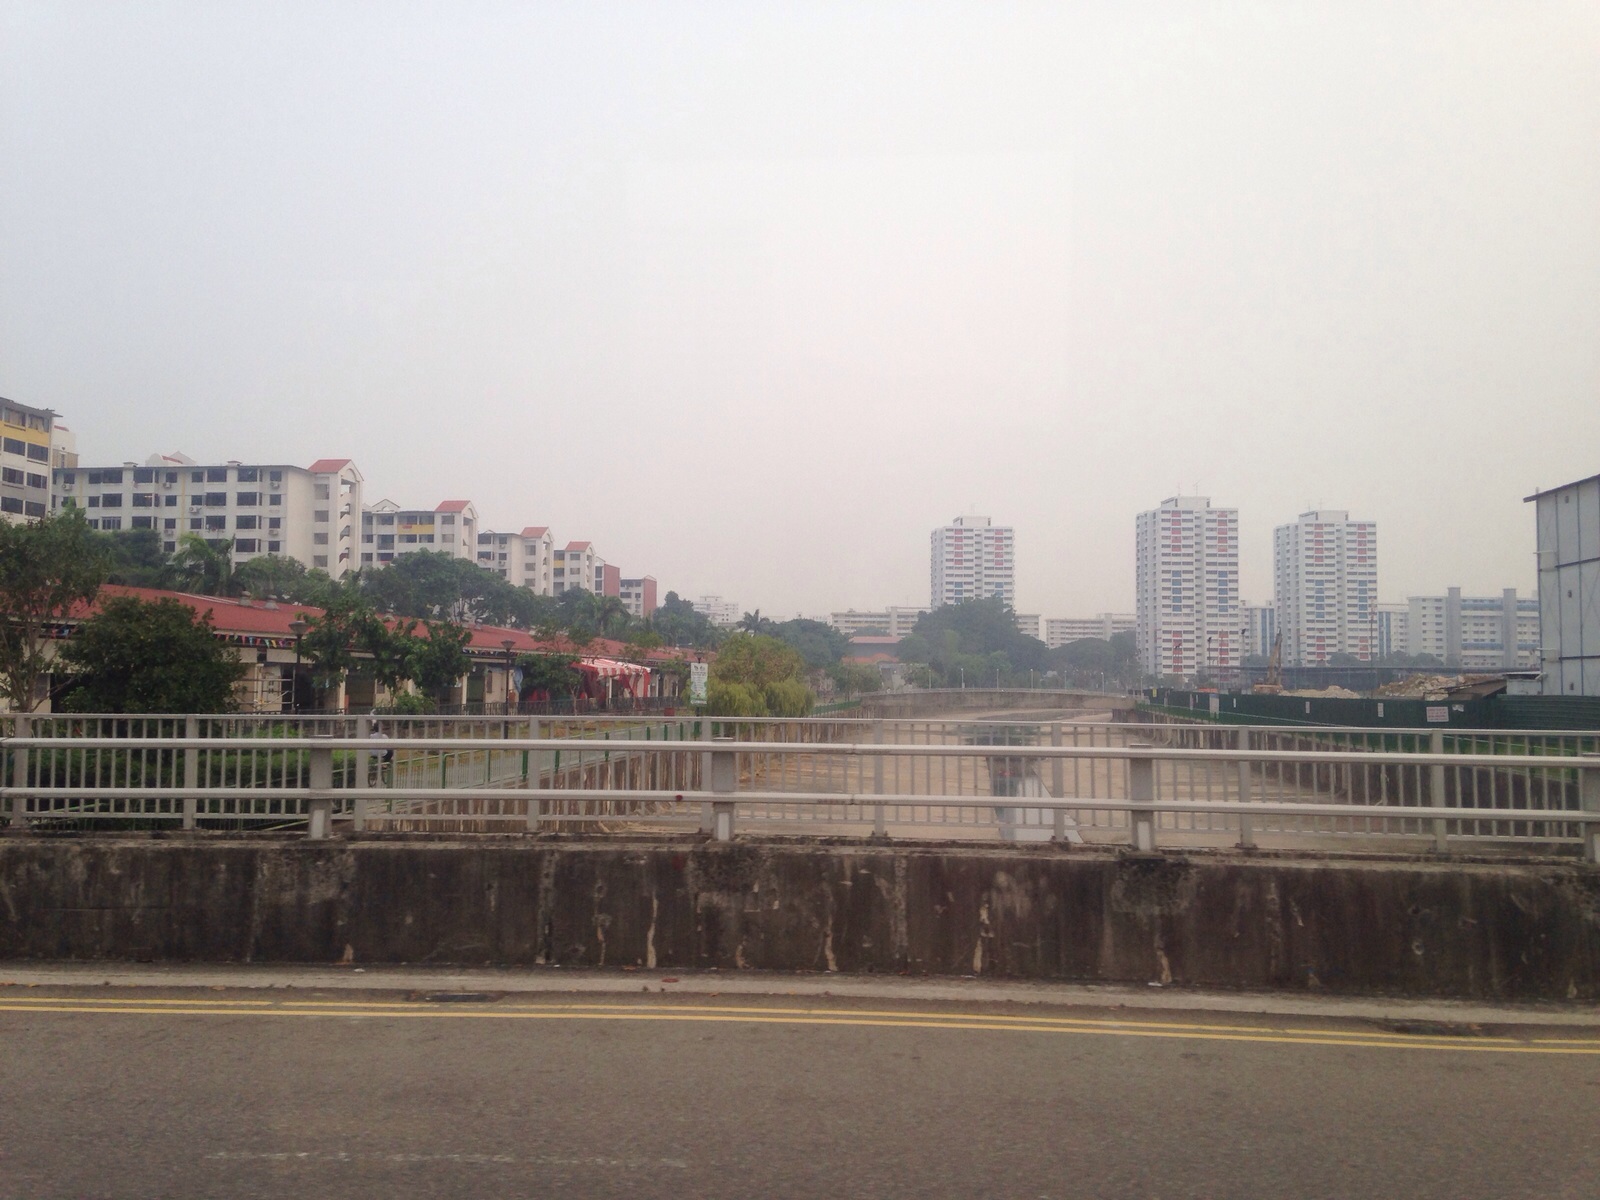 In MacPherson. Photo by Grace Yeoh